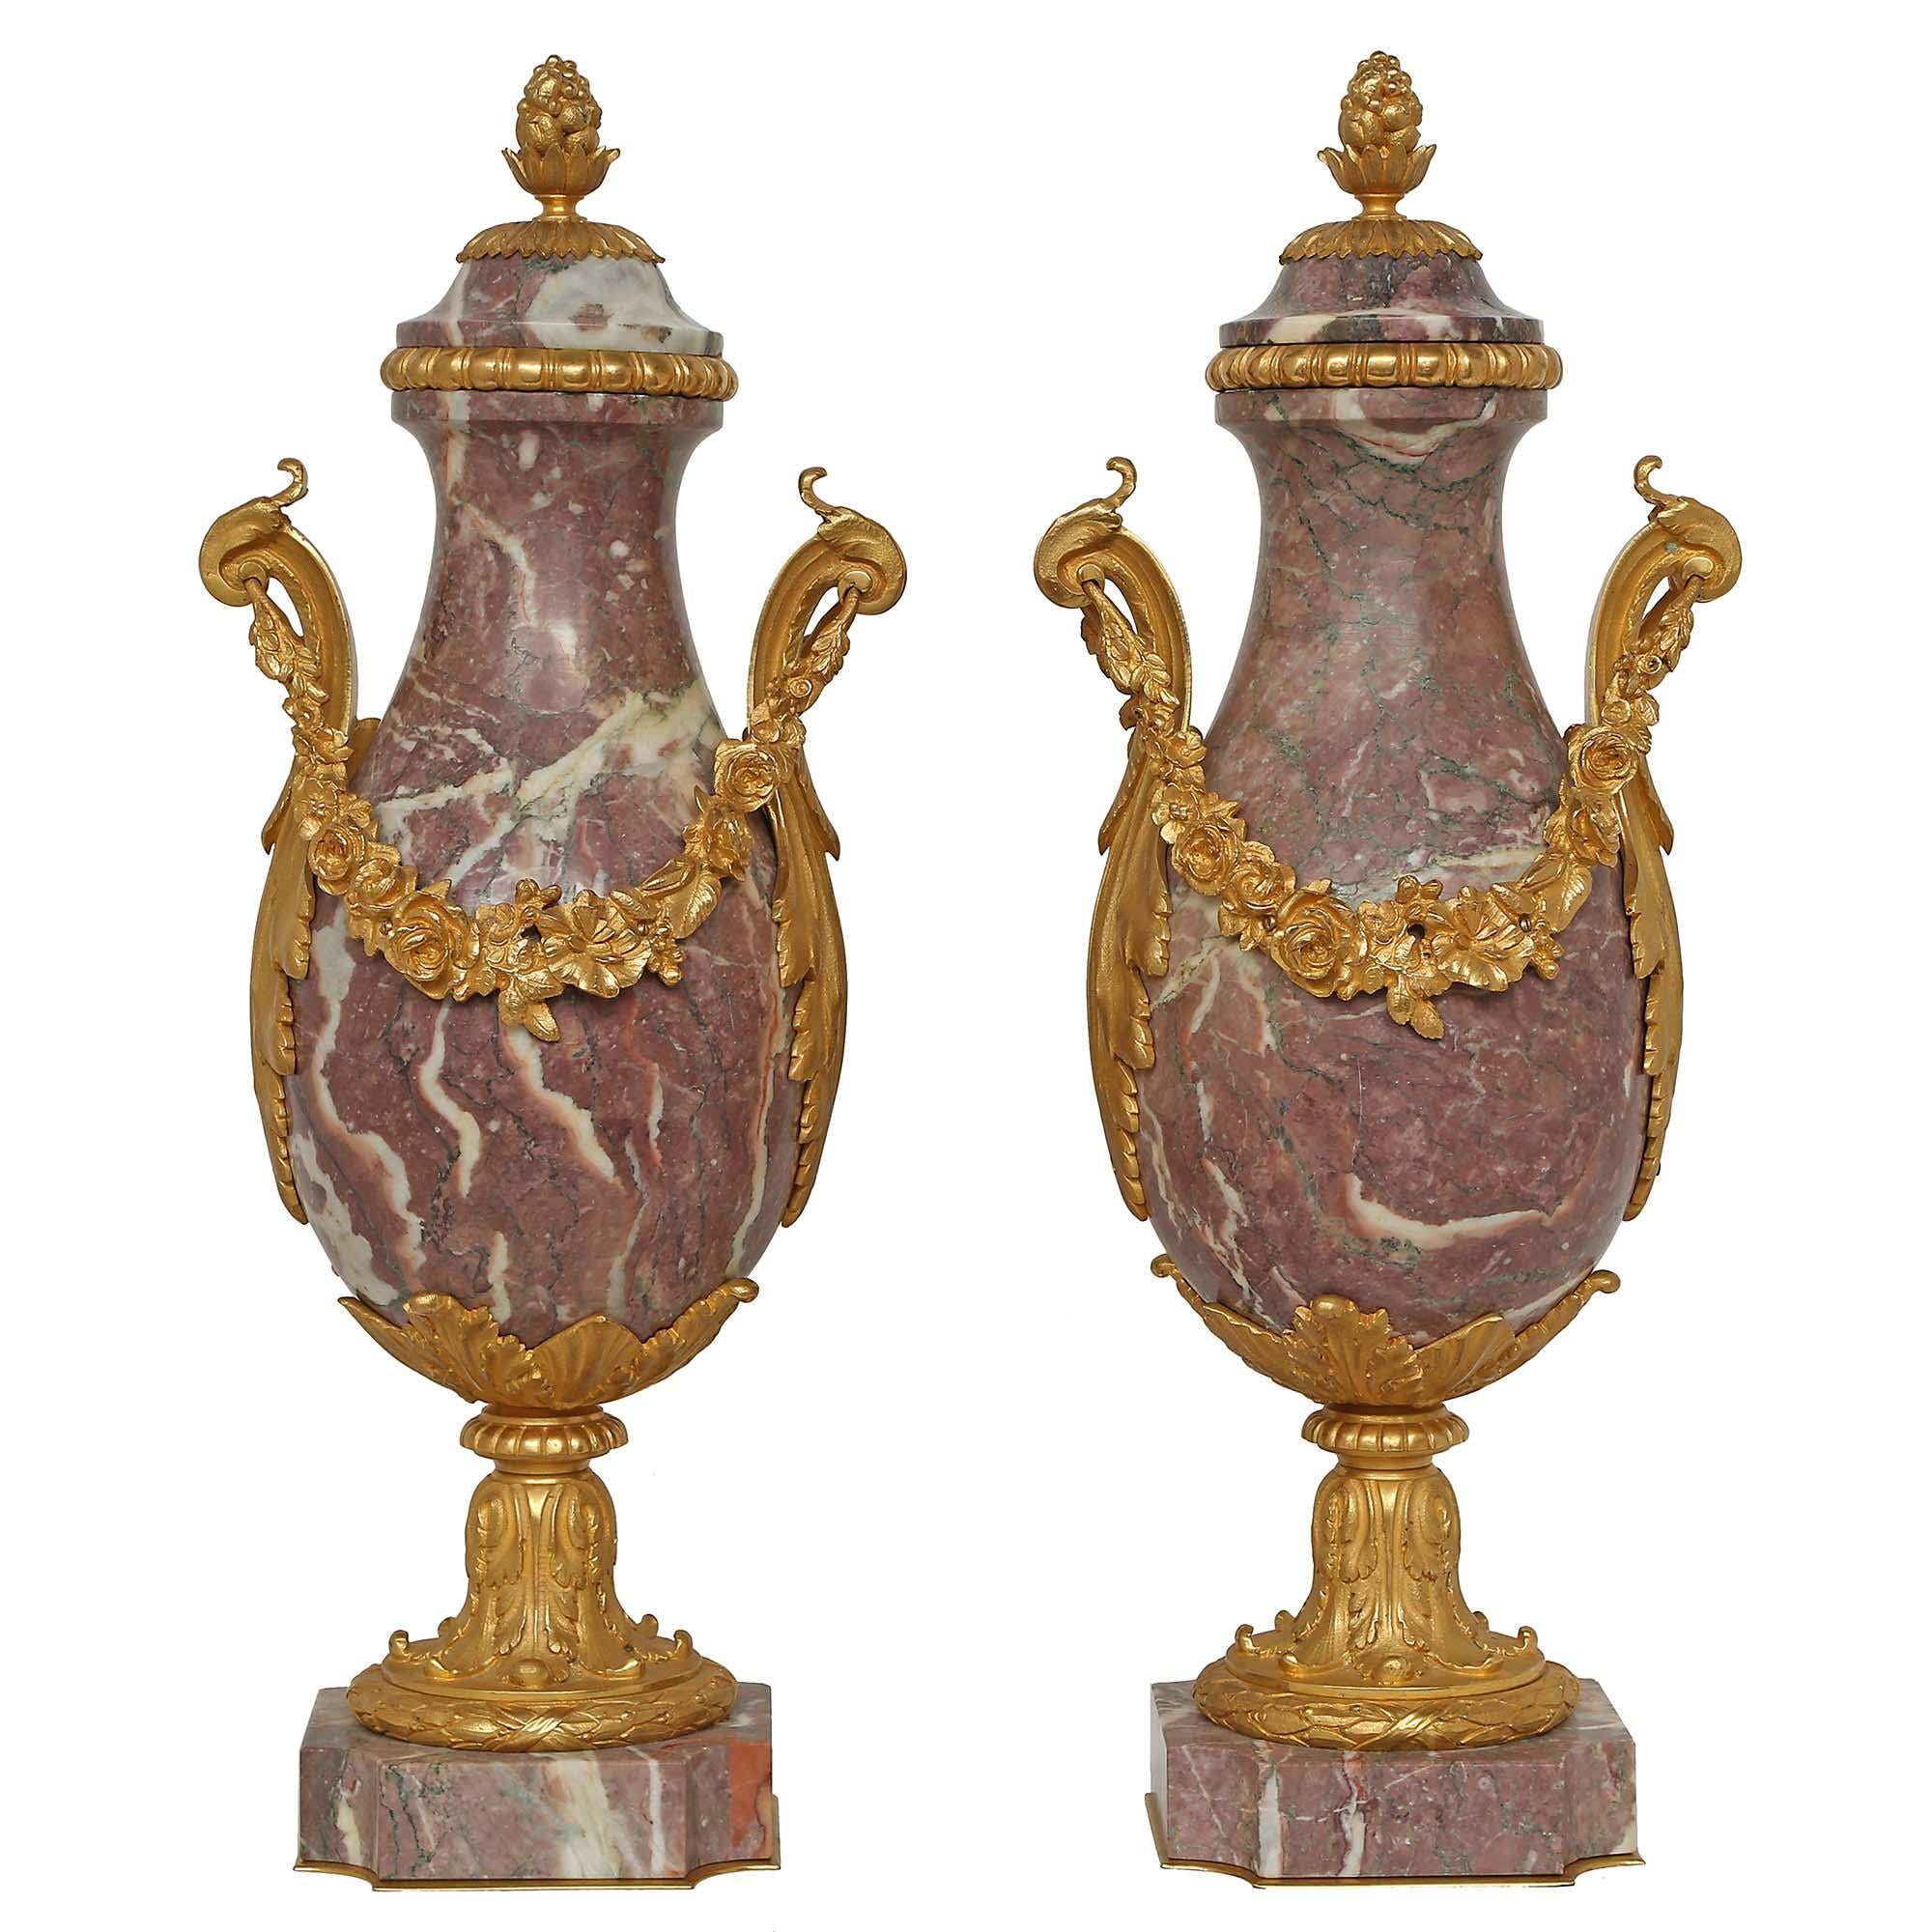 A pair of impressive French mid 19th century Louis XV st. ormolu and Rouge Royale marble cassolettes. The marble bases are ornamented with ormolu acanthus leaf designs. Each with two handles in the shape of S scrolls and acanthus leaf designs. The